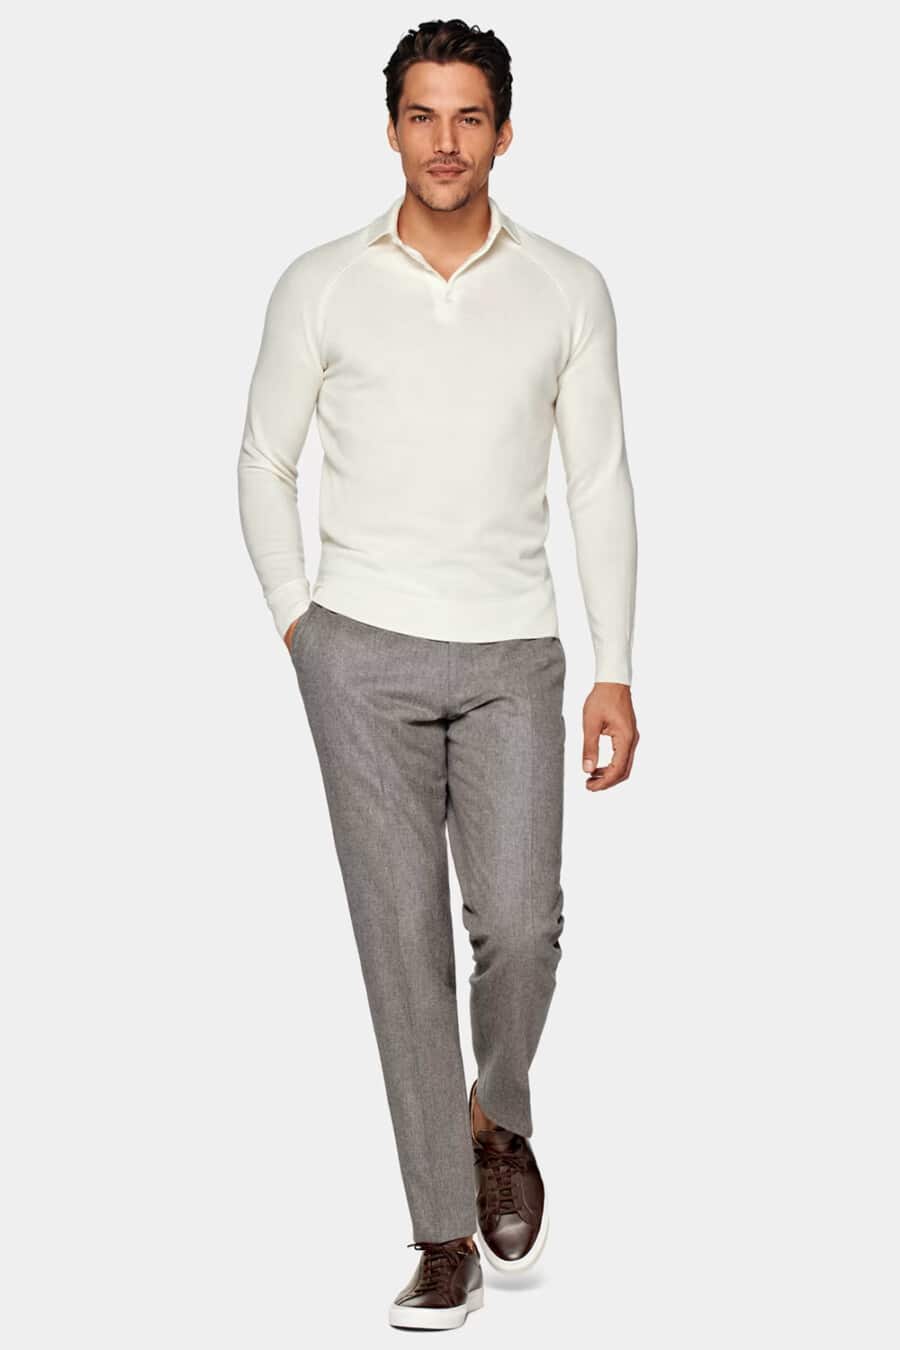 Men's grey tailored pants, white long-sleeve knitted polo shirt and brown leather sneakers worn sockless outfit